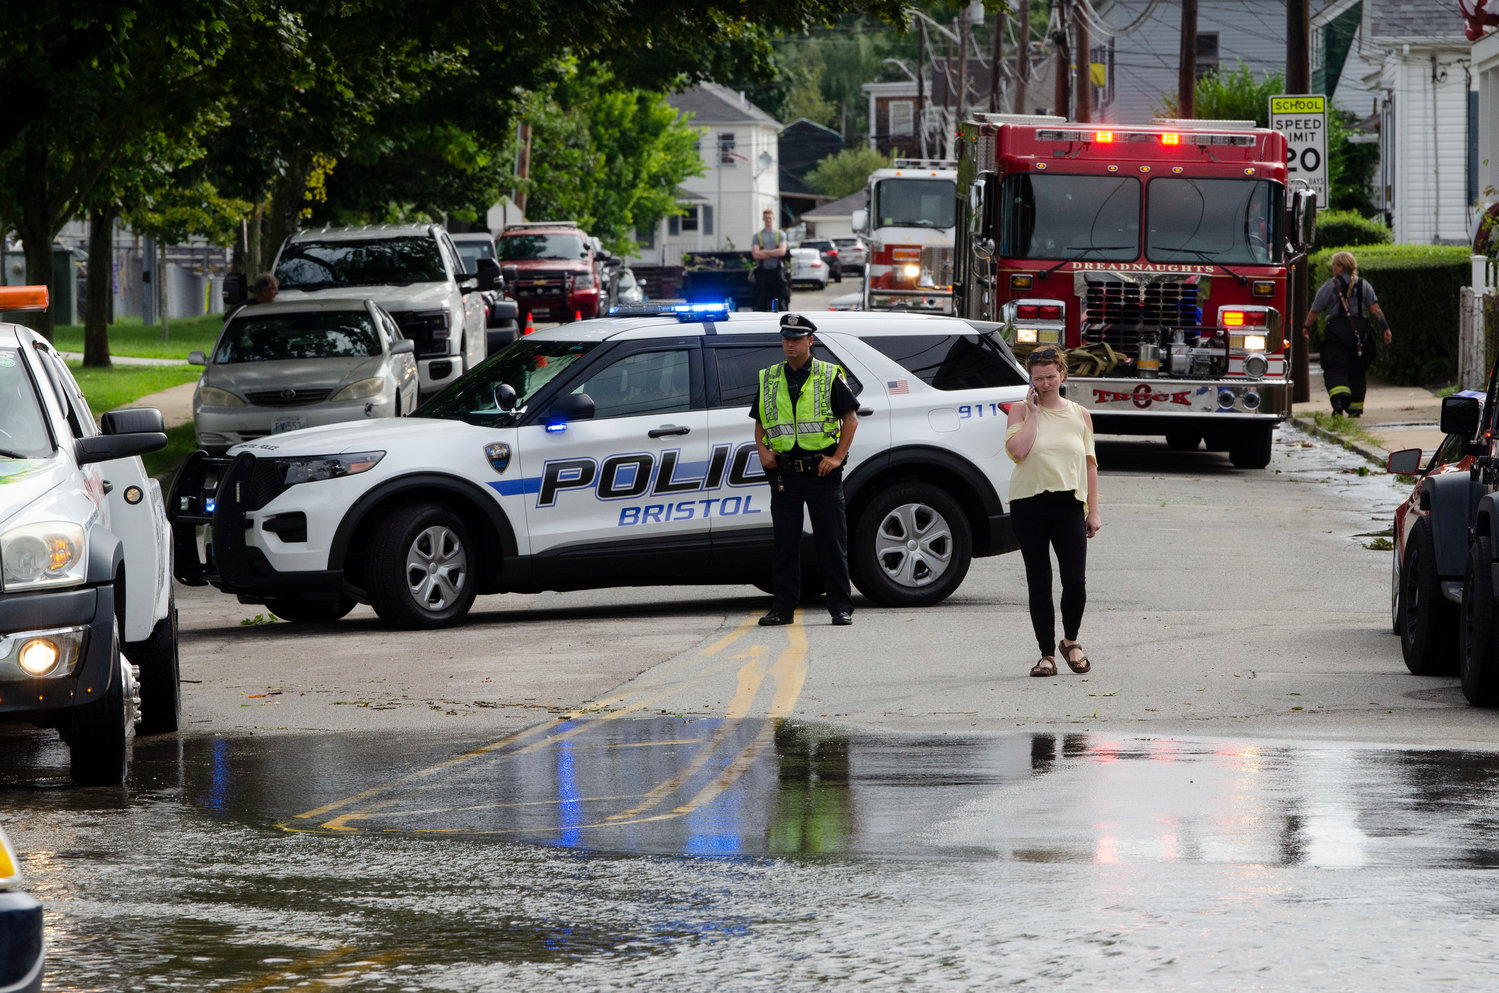 A Bristol Policeman looks on as a woman waits for a tow truck after getting stuck in the flood on Washington Street.